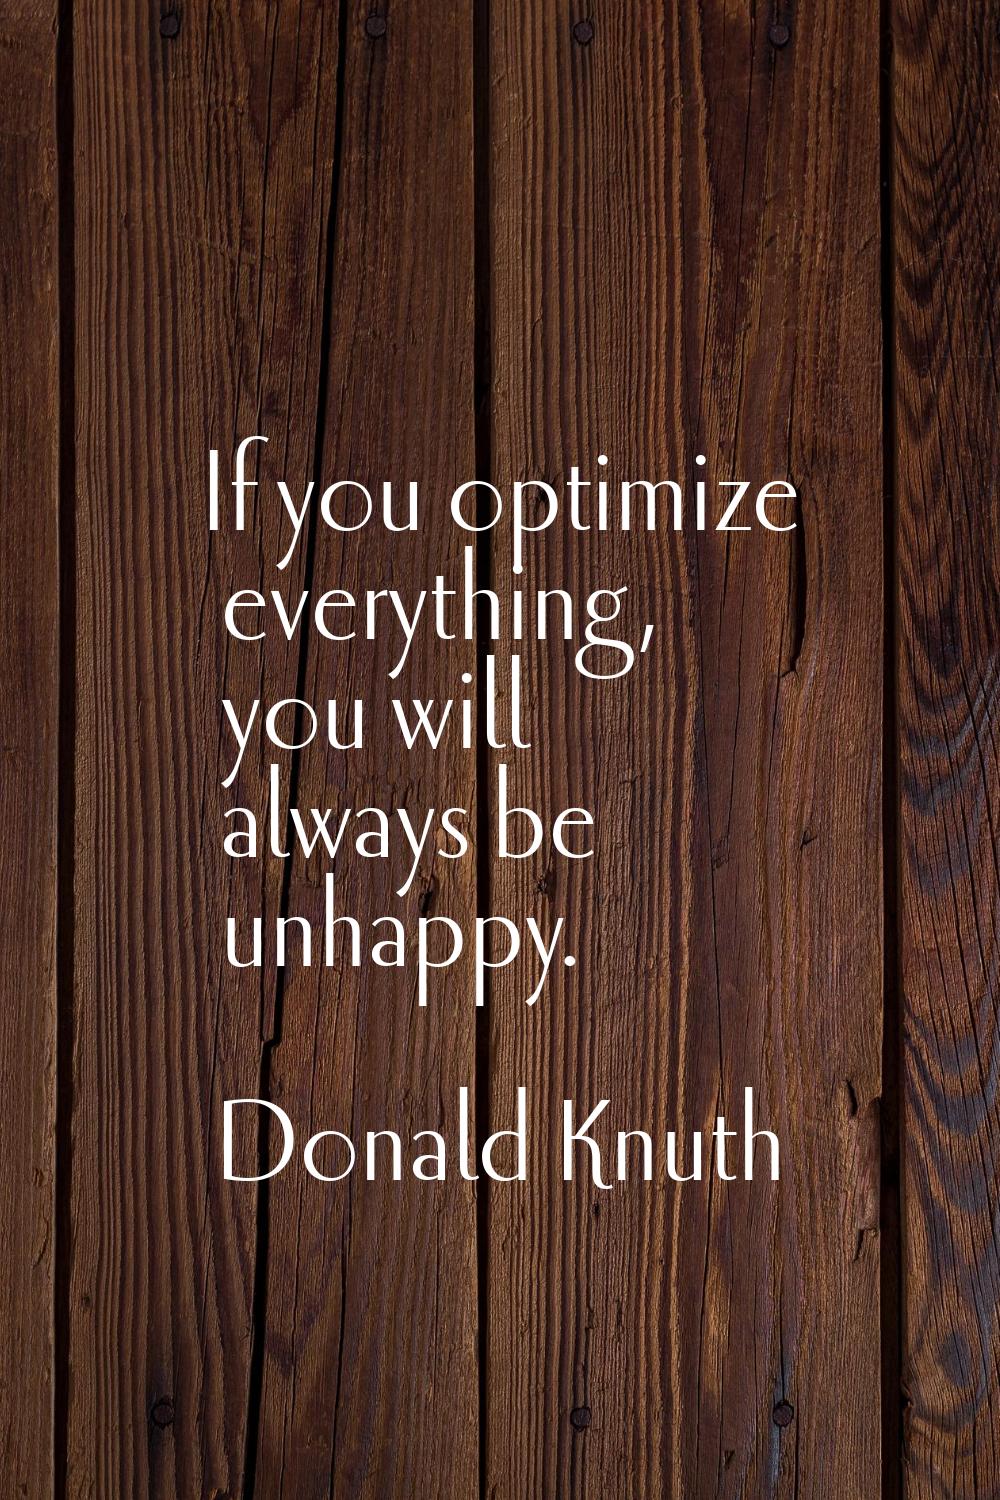 If you optimize everything, you will always be unhappy.